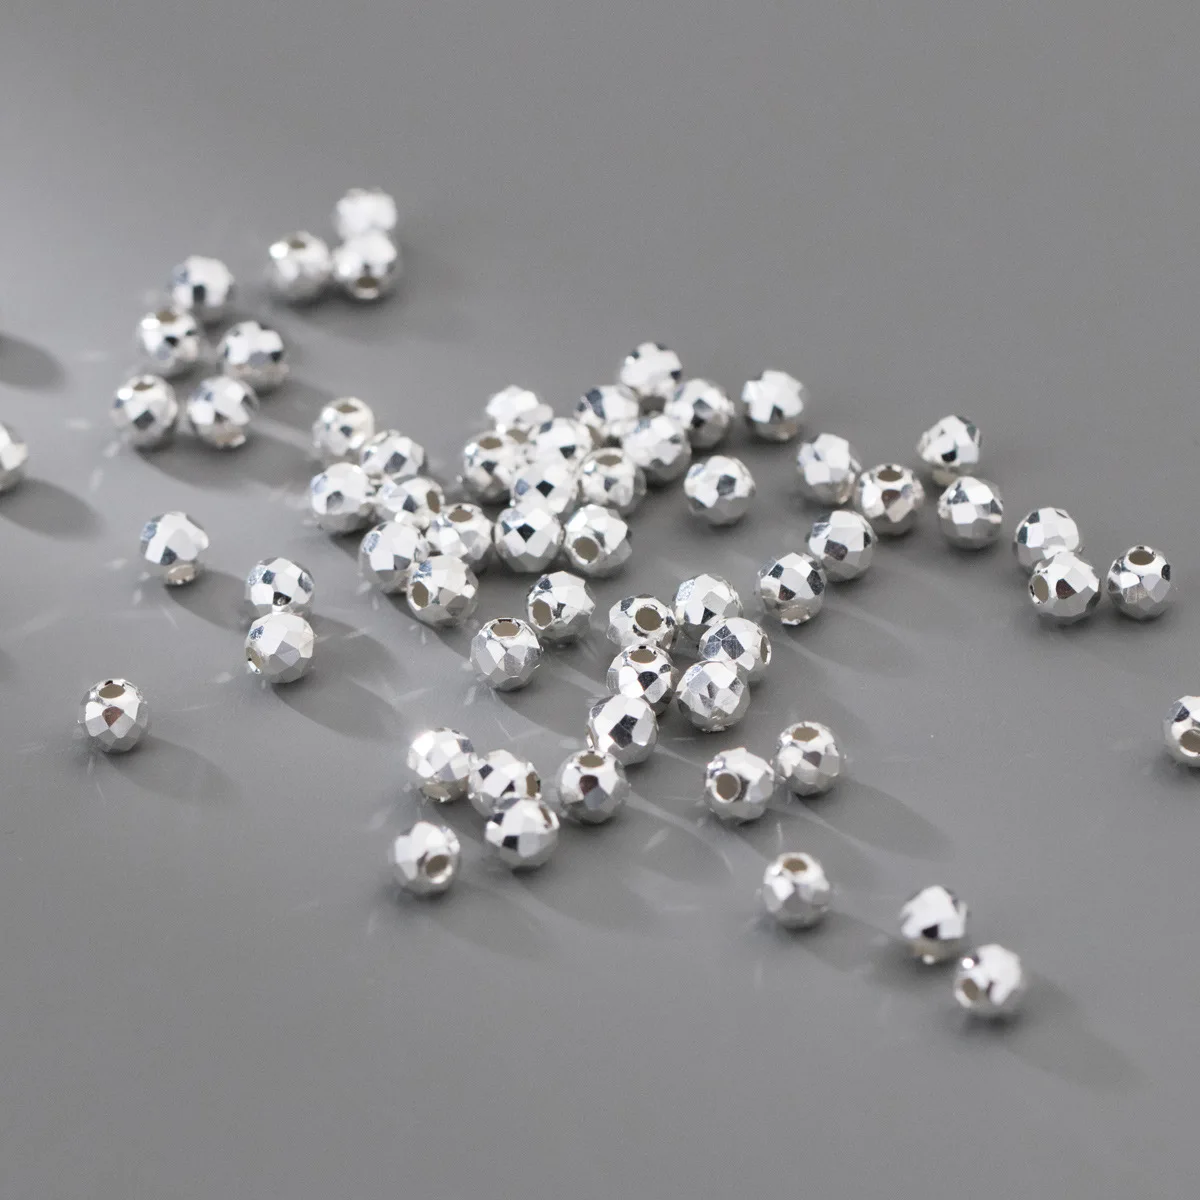 

5pcs/Lot 925 Sterling Silver Small Faceted Loose Beads 2.5mm 3.5mm 5mm Handmade Geometry Silver Bead Spacers DIY Jewelry Making